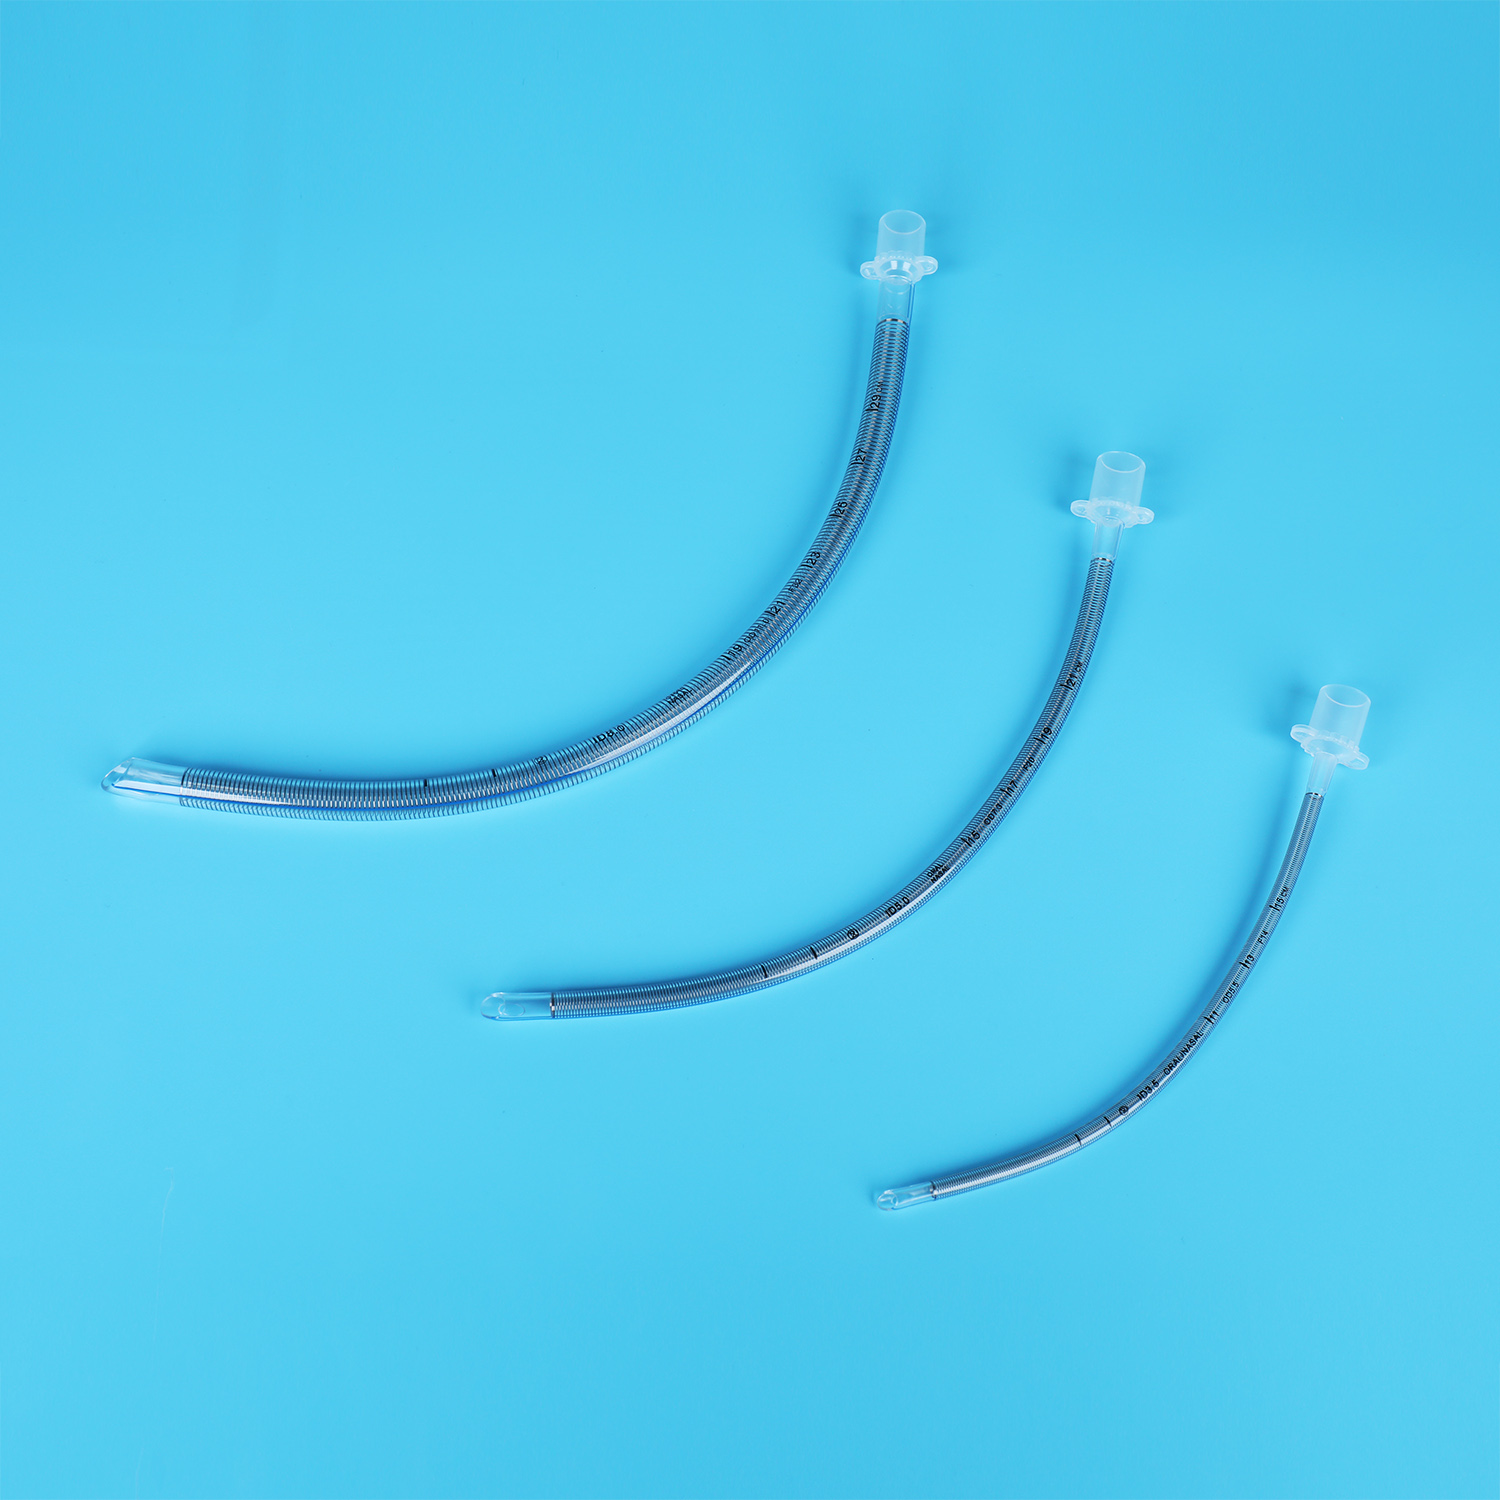 China Armoured Reinforced Endotracheal Tube Flexible Soft Tip Uncuff Factory Direct Supply Whole Sales China Profile Cuff Tracheal Catheter Oxygen Tube